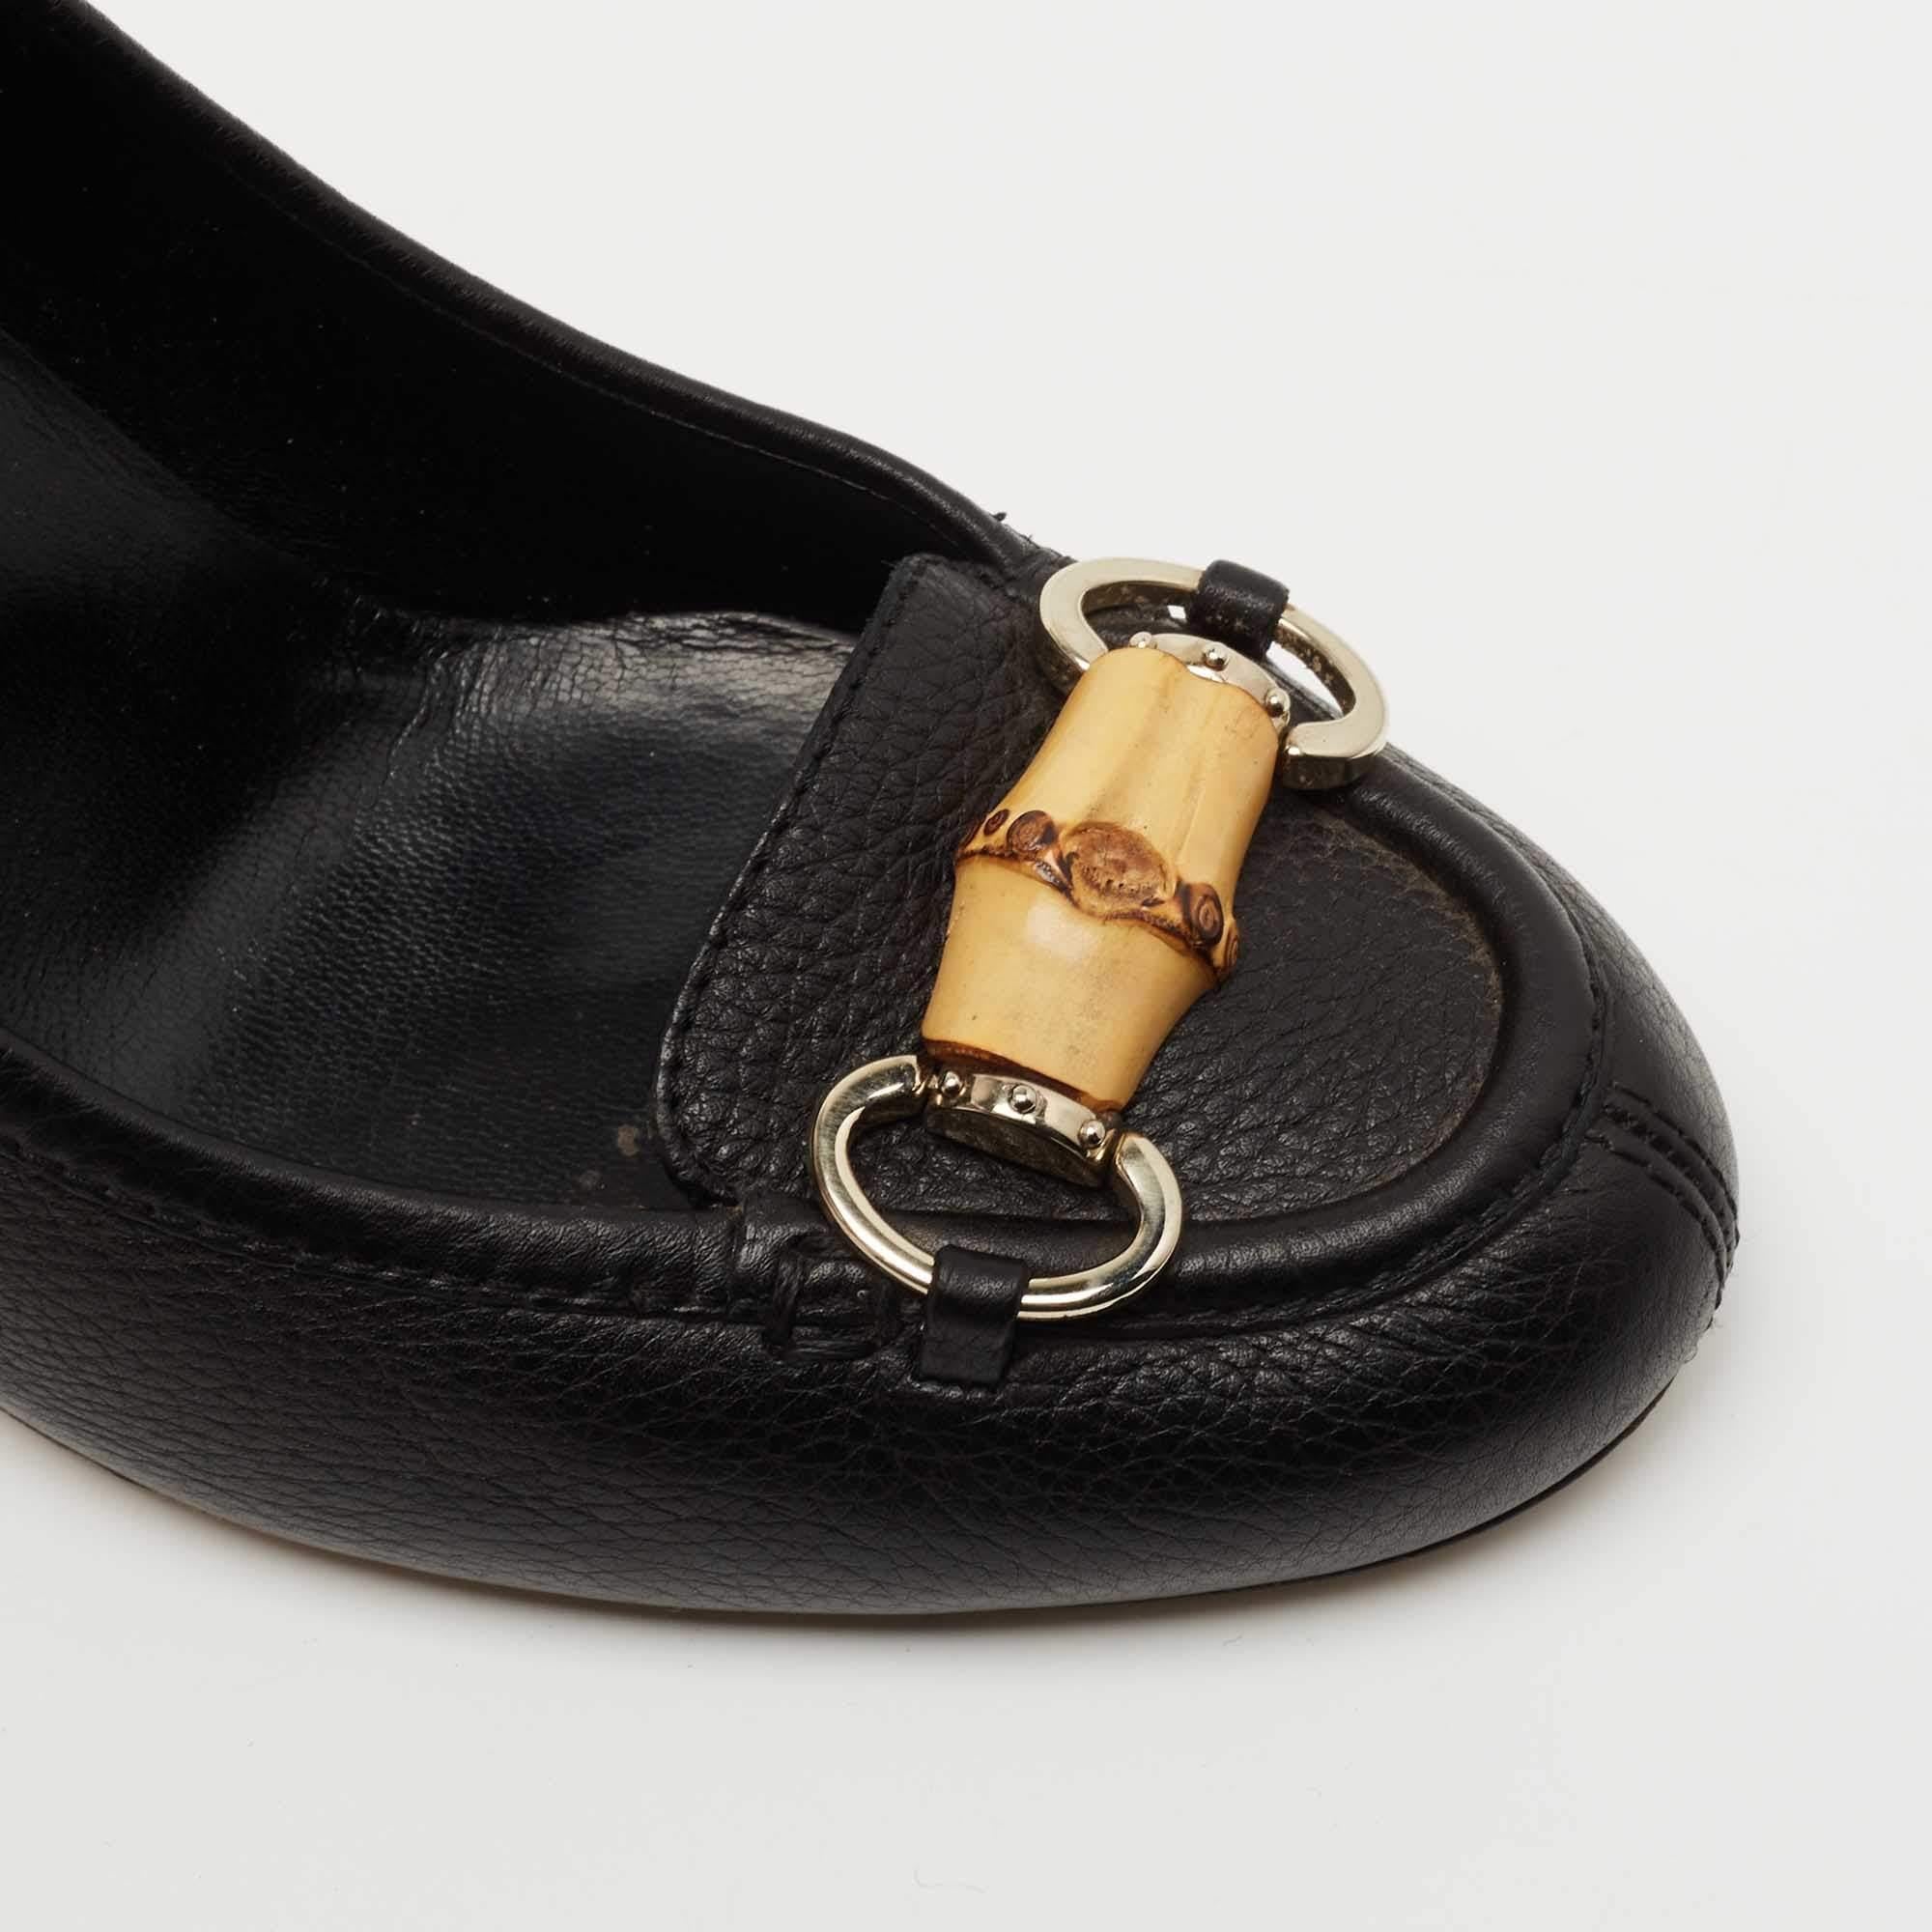 Gucci Black Leather Bamboo Horsebit Loafer Pumps Size 38.5 For Sale 2